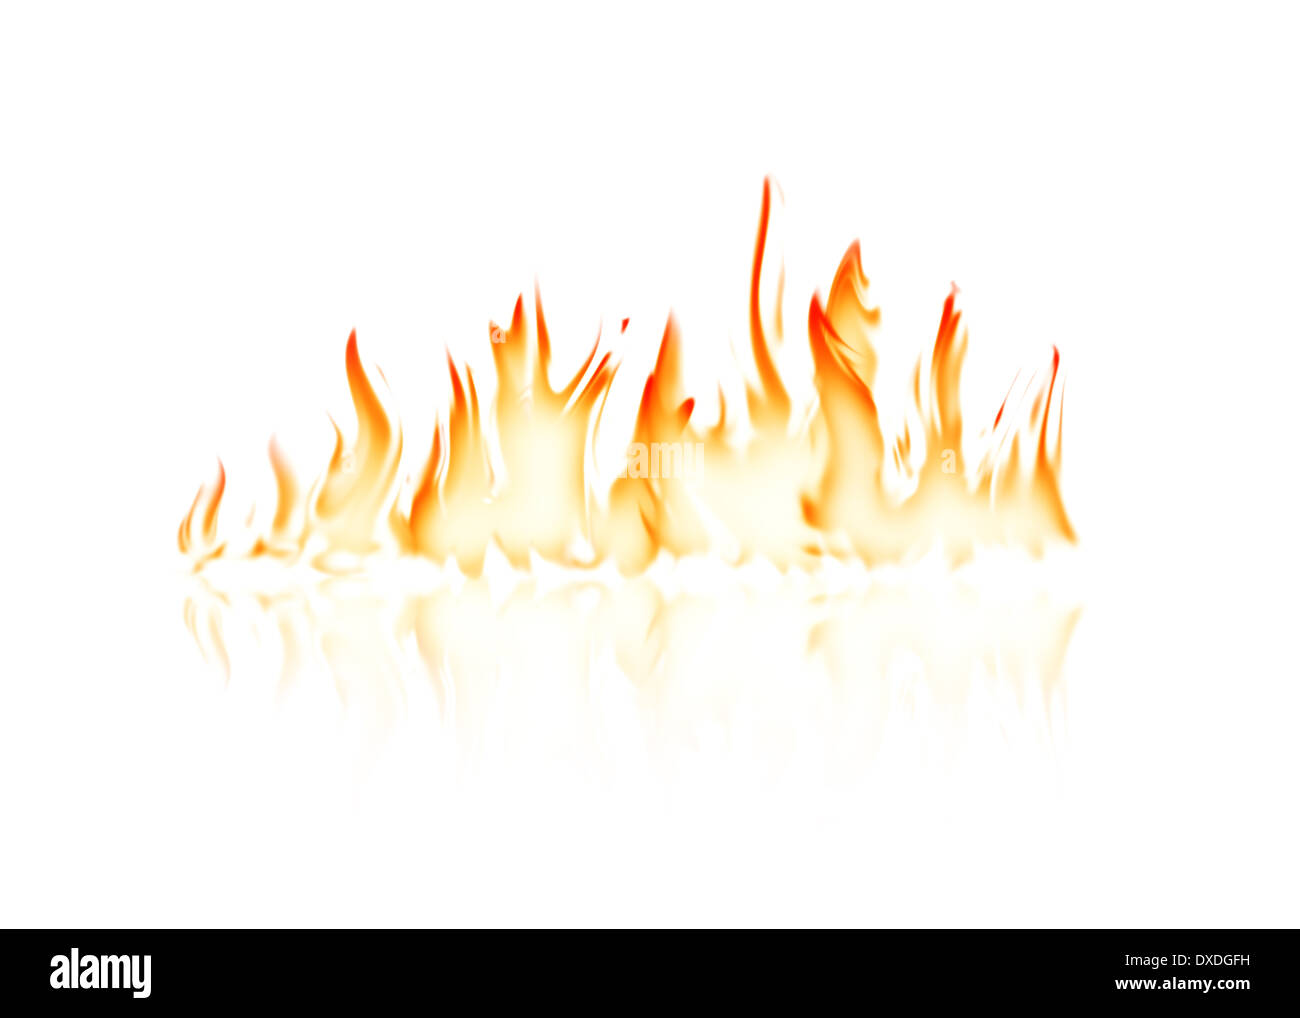 Burning fire flame with reflection on white background Stock Photo - Alamy